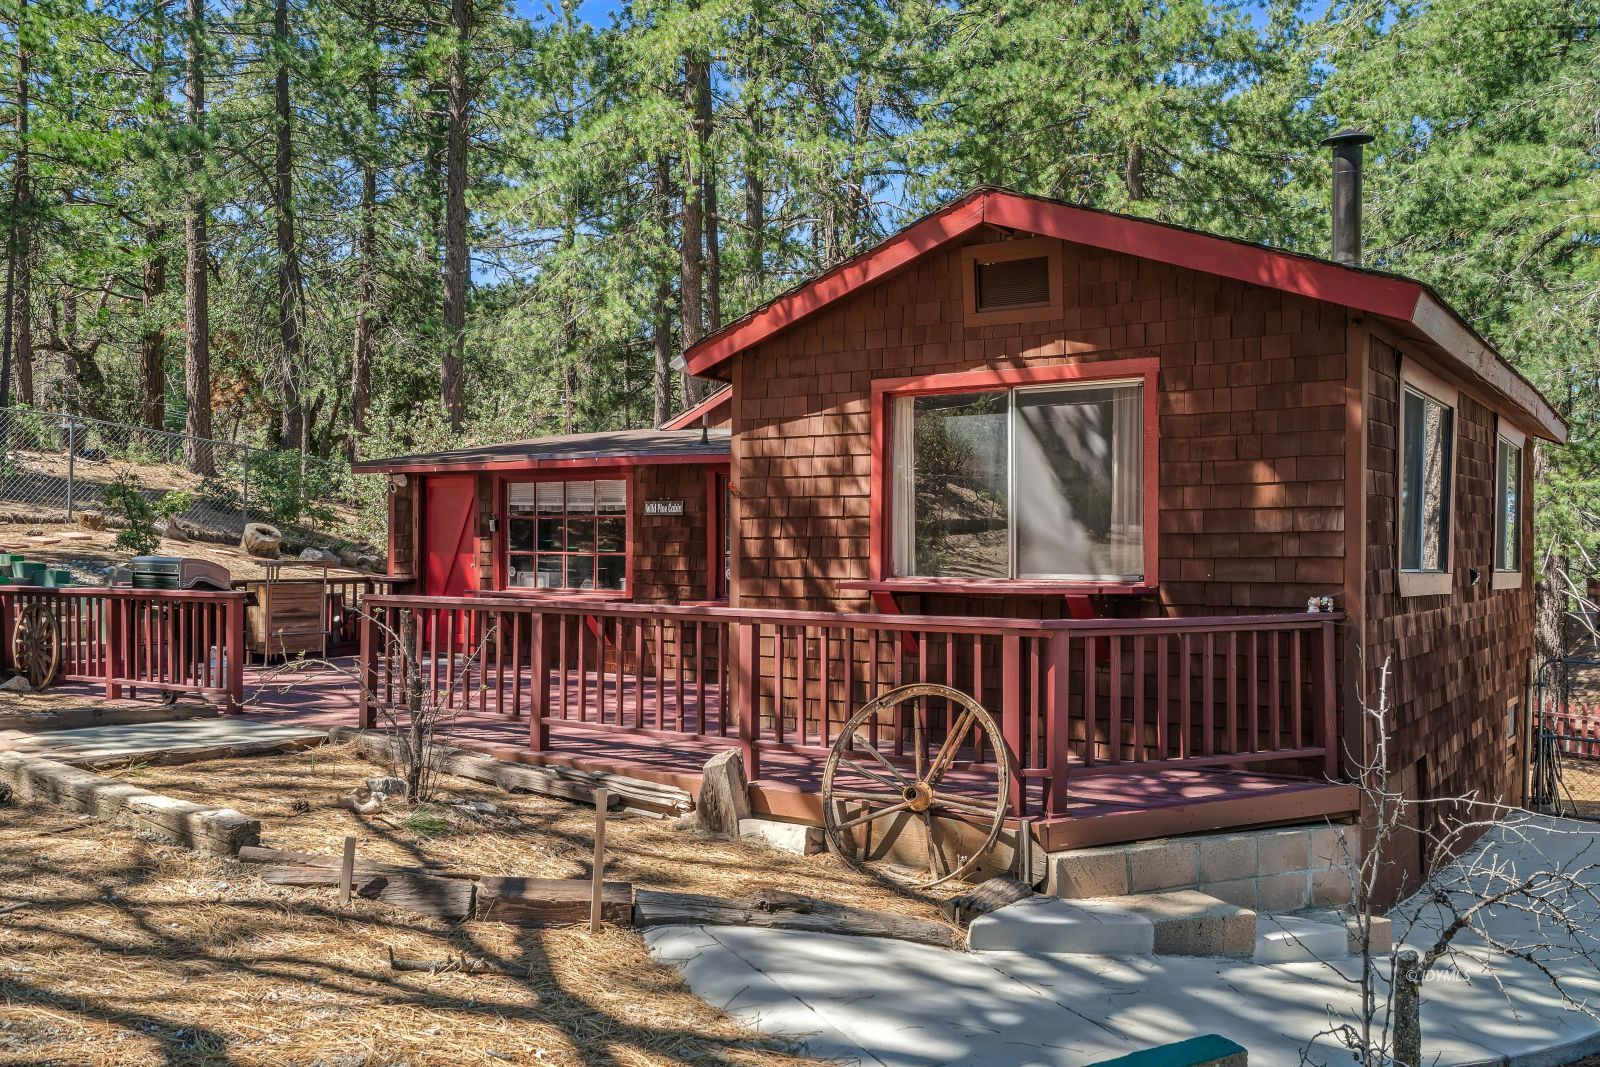 Welcome to Wild Pine cabin!